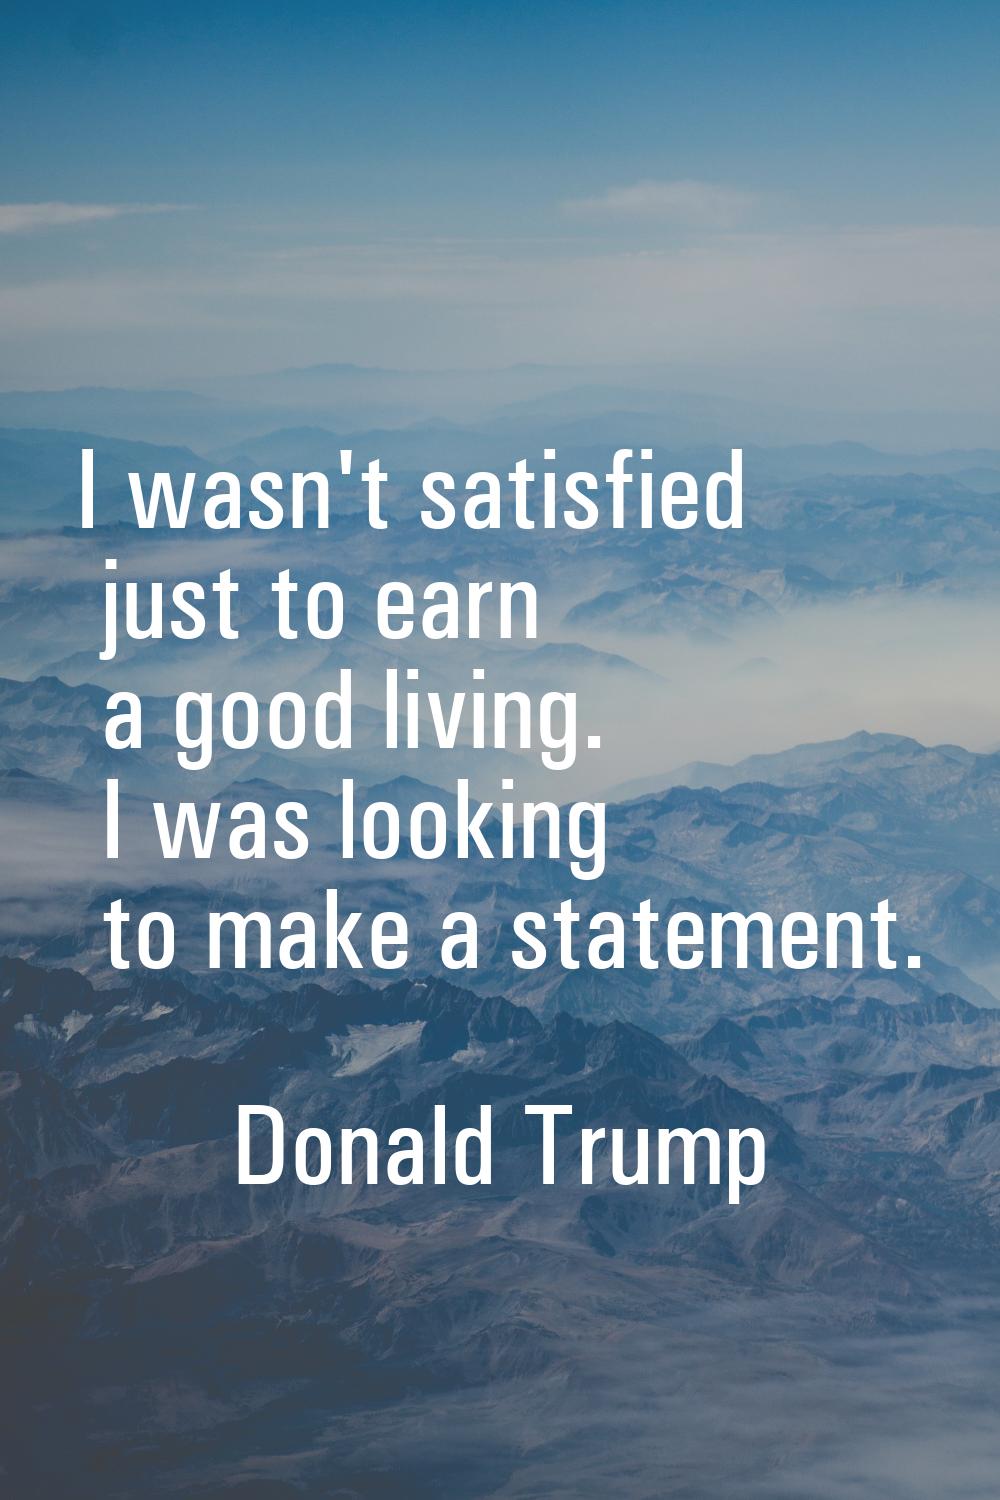 I wasn't satisfied just to earn a good living. I was looking to make a statement.